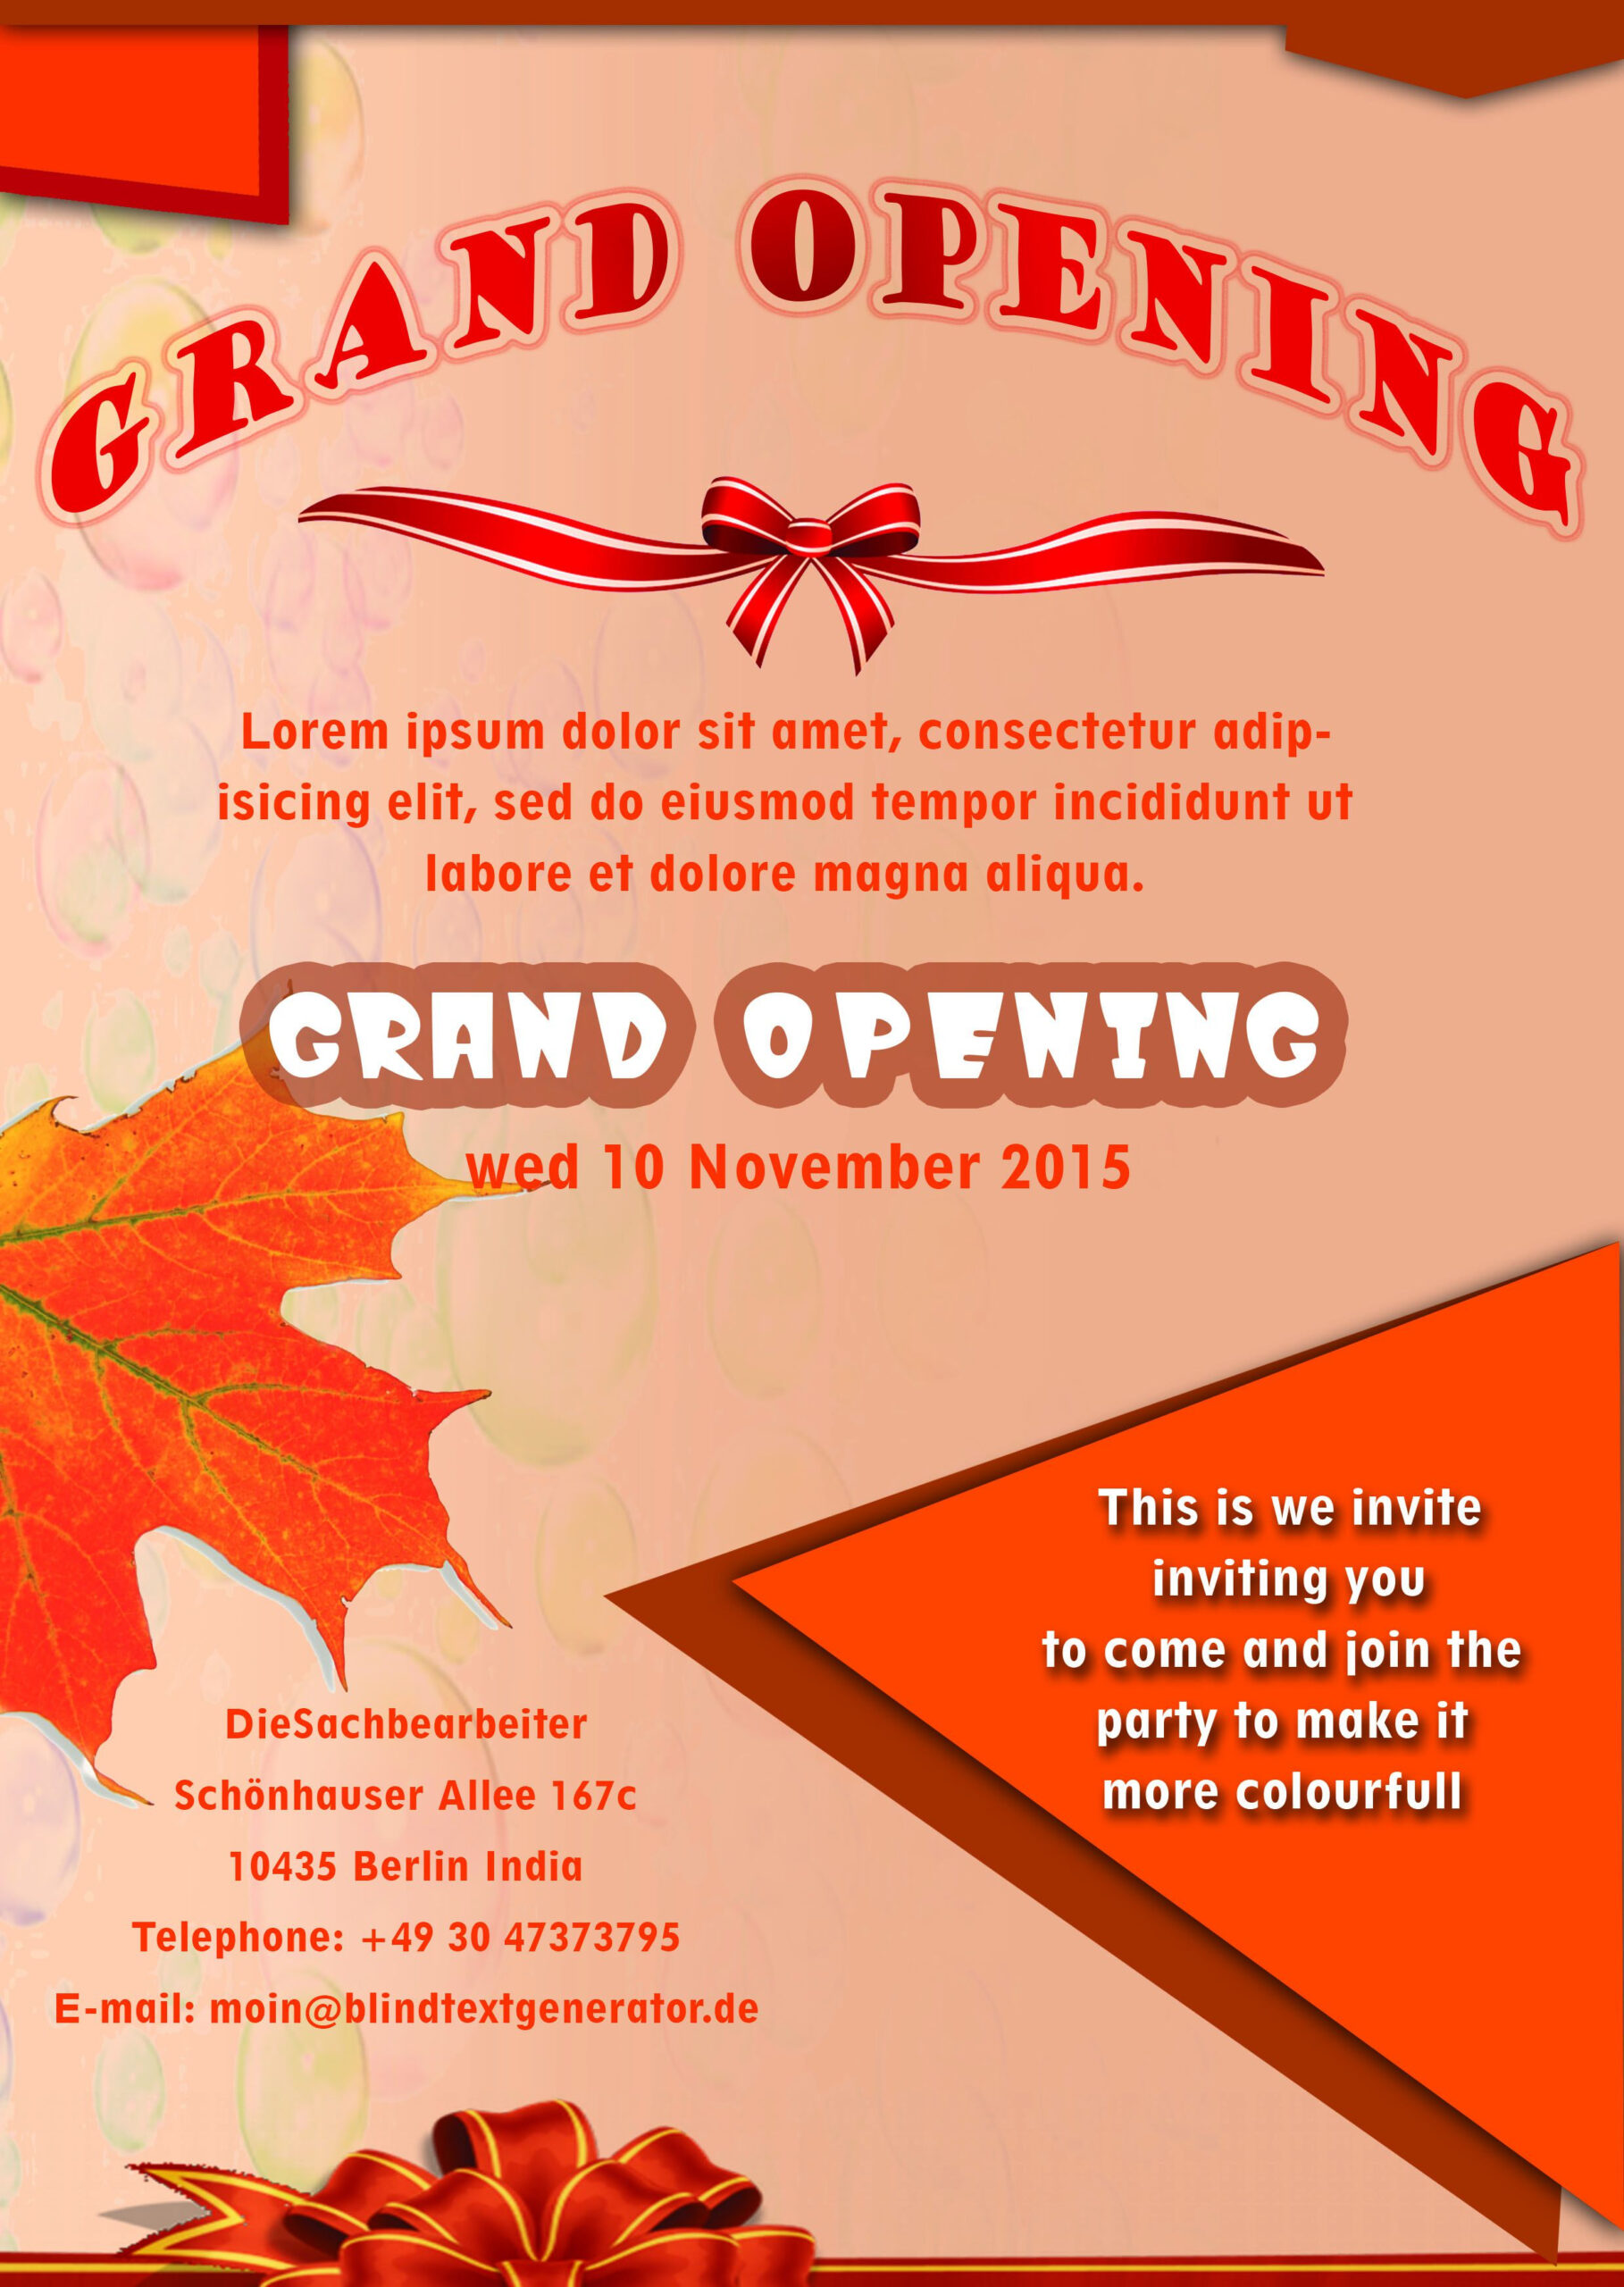 20 Grand Opening Flyer Templates Free – Demplates Within Grand Opening Flyer Template Free